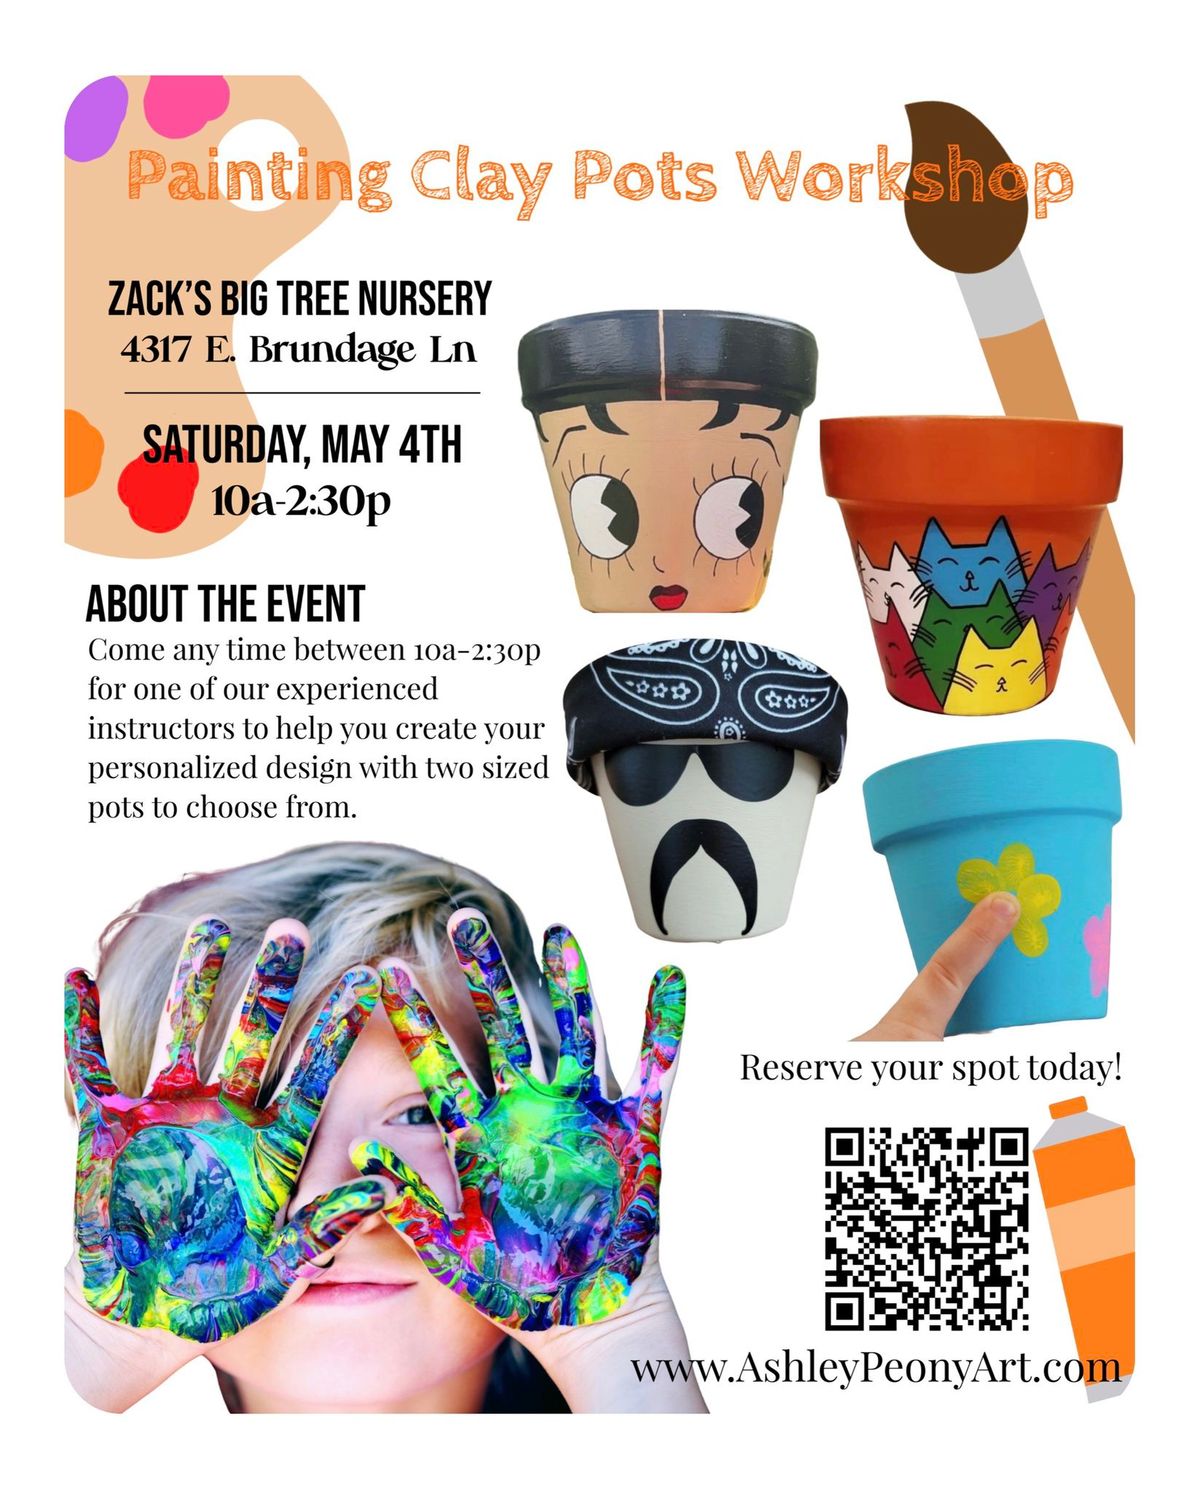 Painting Clay Pots Workshop